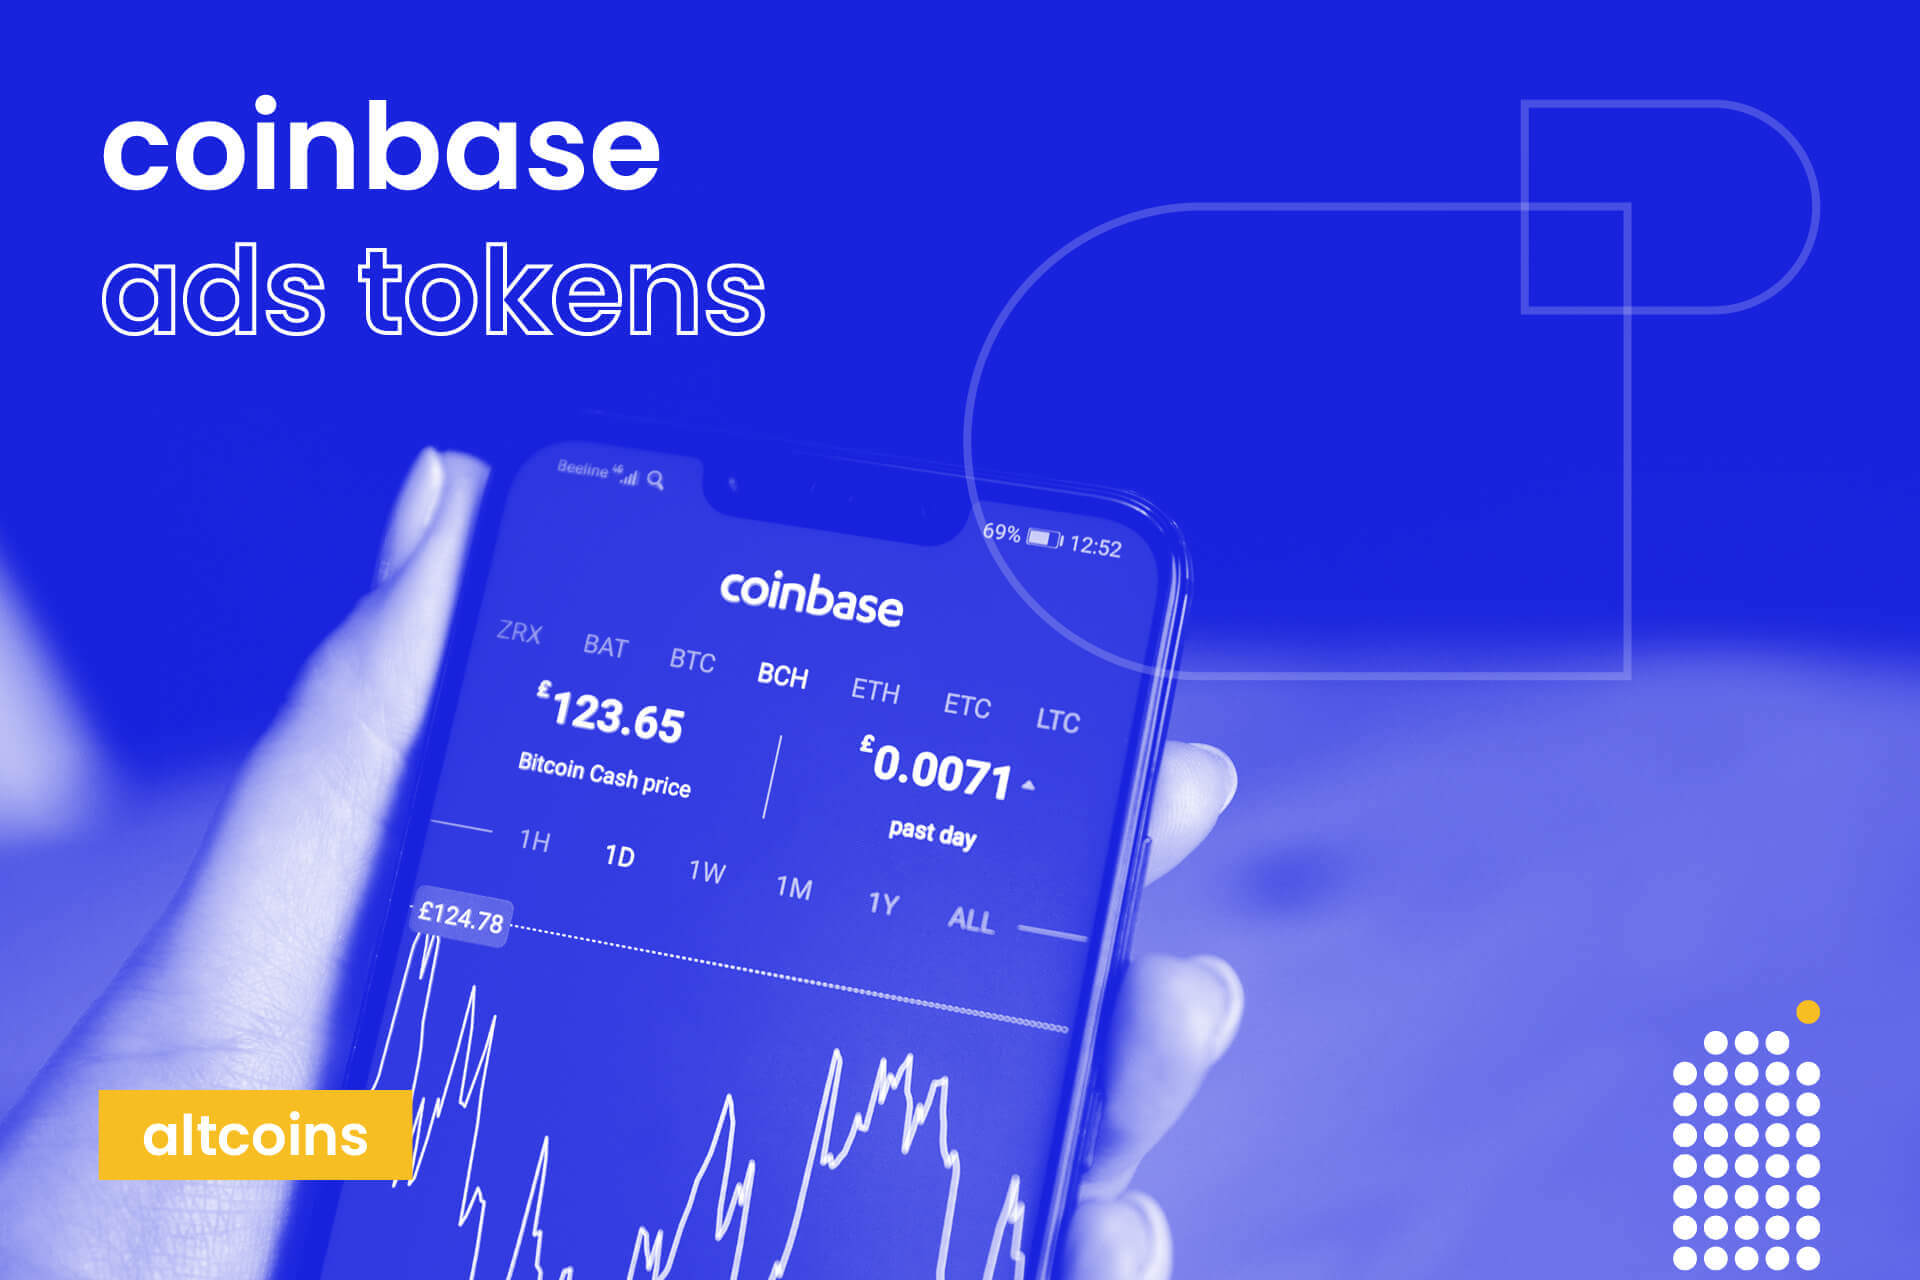 twitter coinbase ads tokens